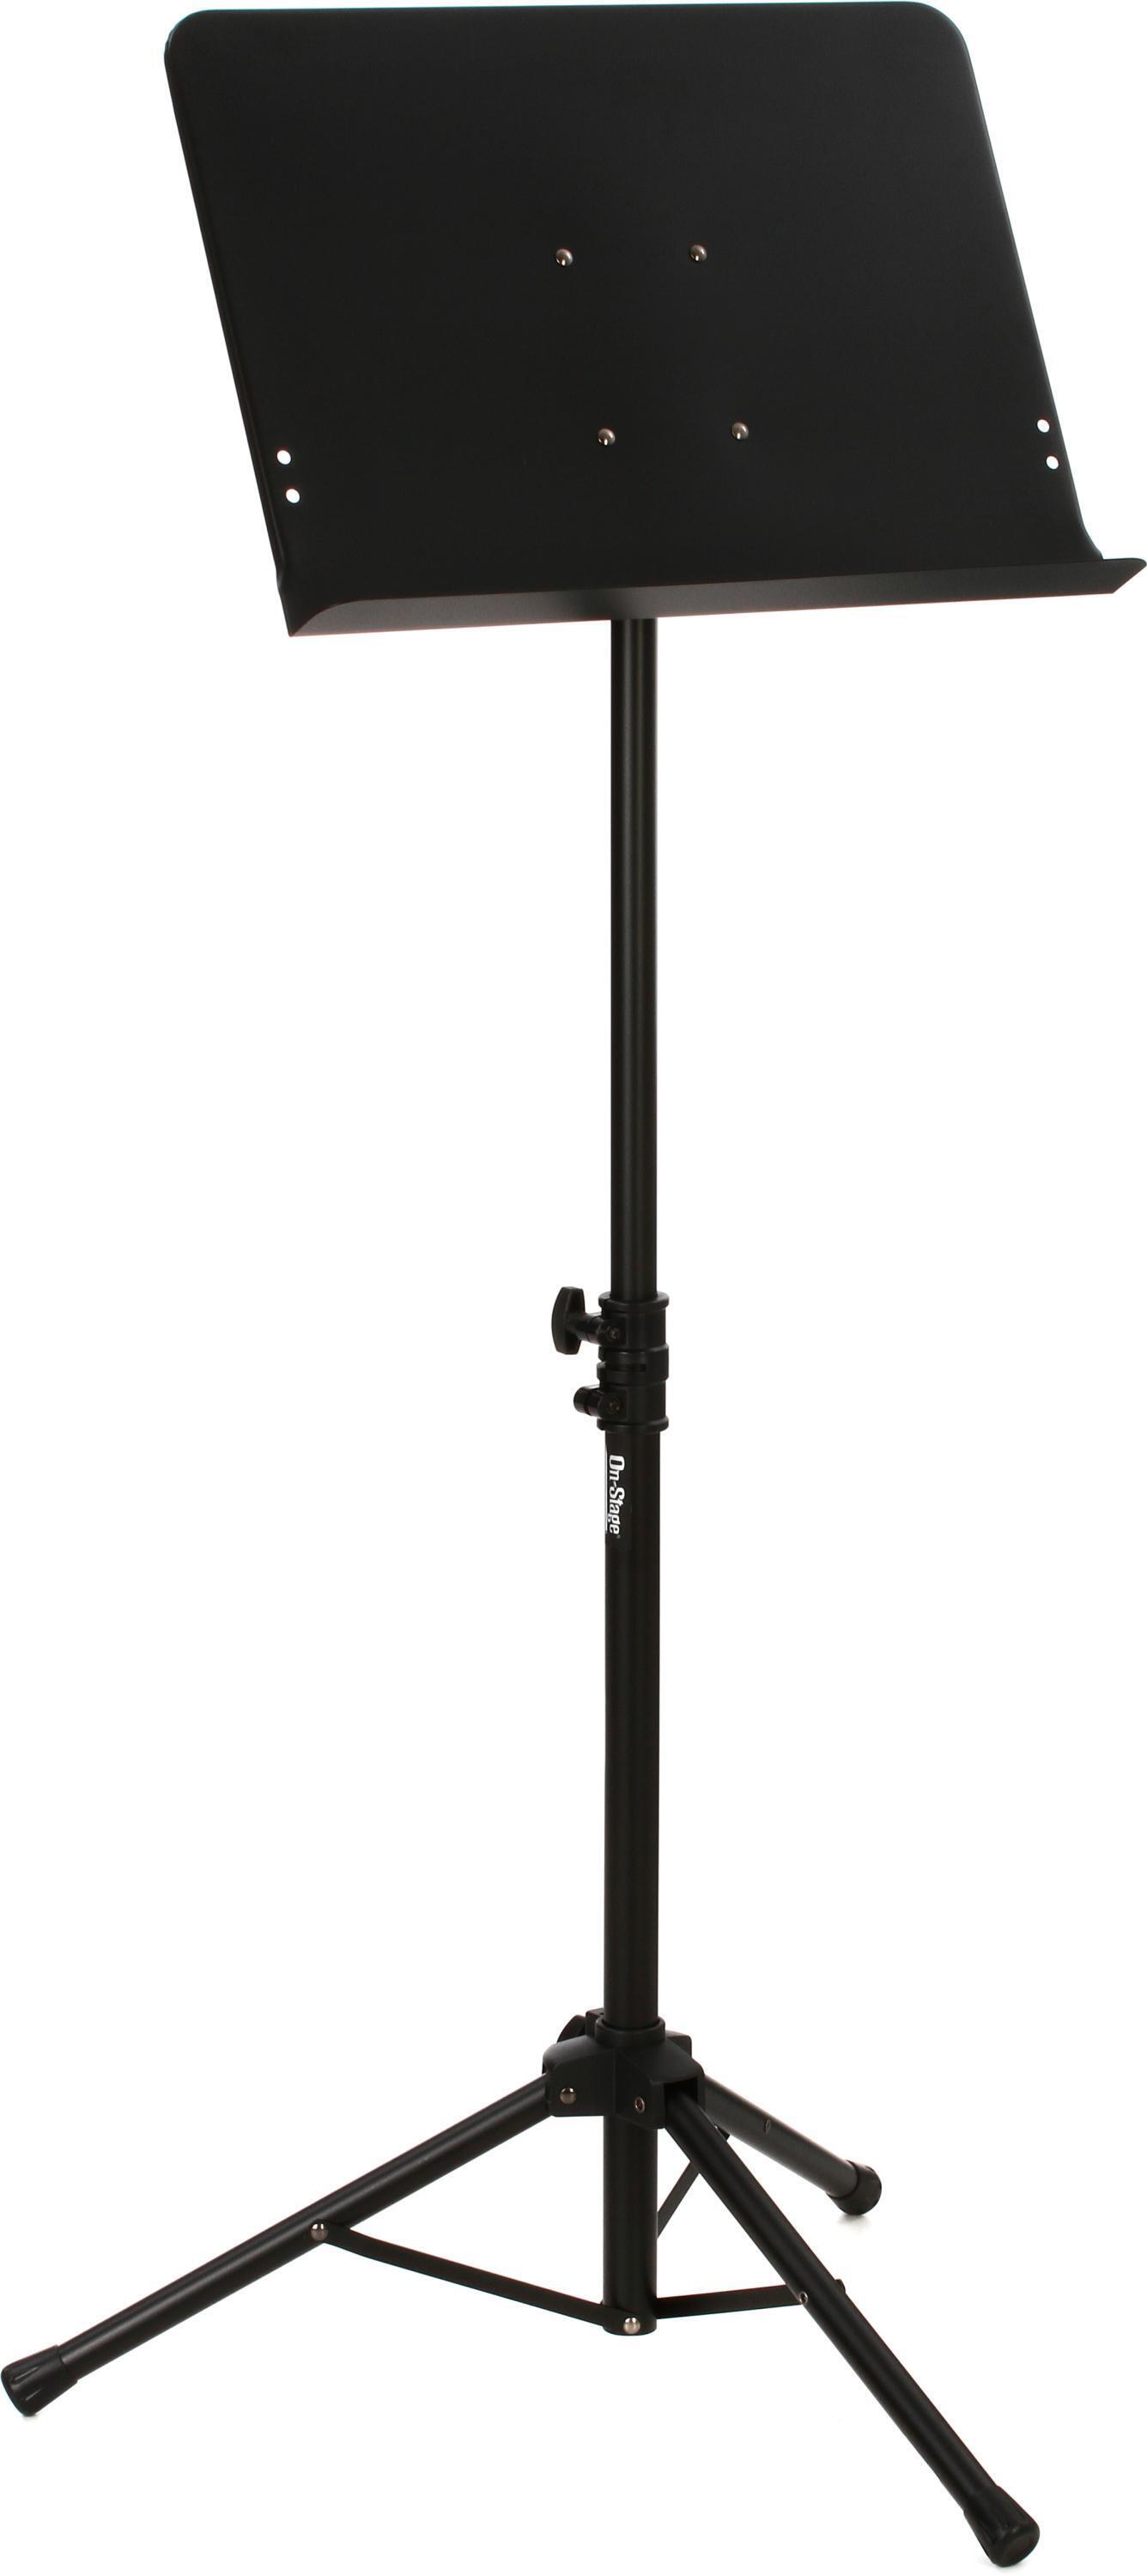 Bundled Item: On-Stage SM7211B Music Stand with Tripod Base